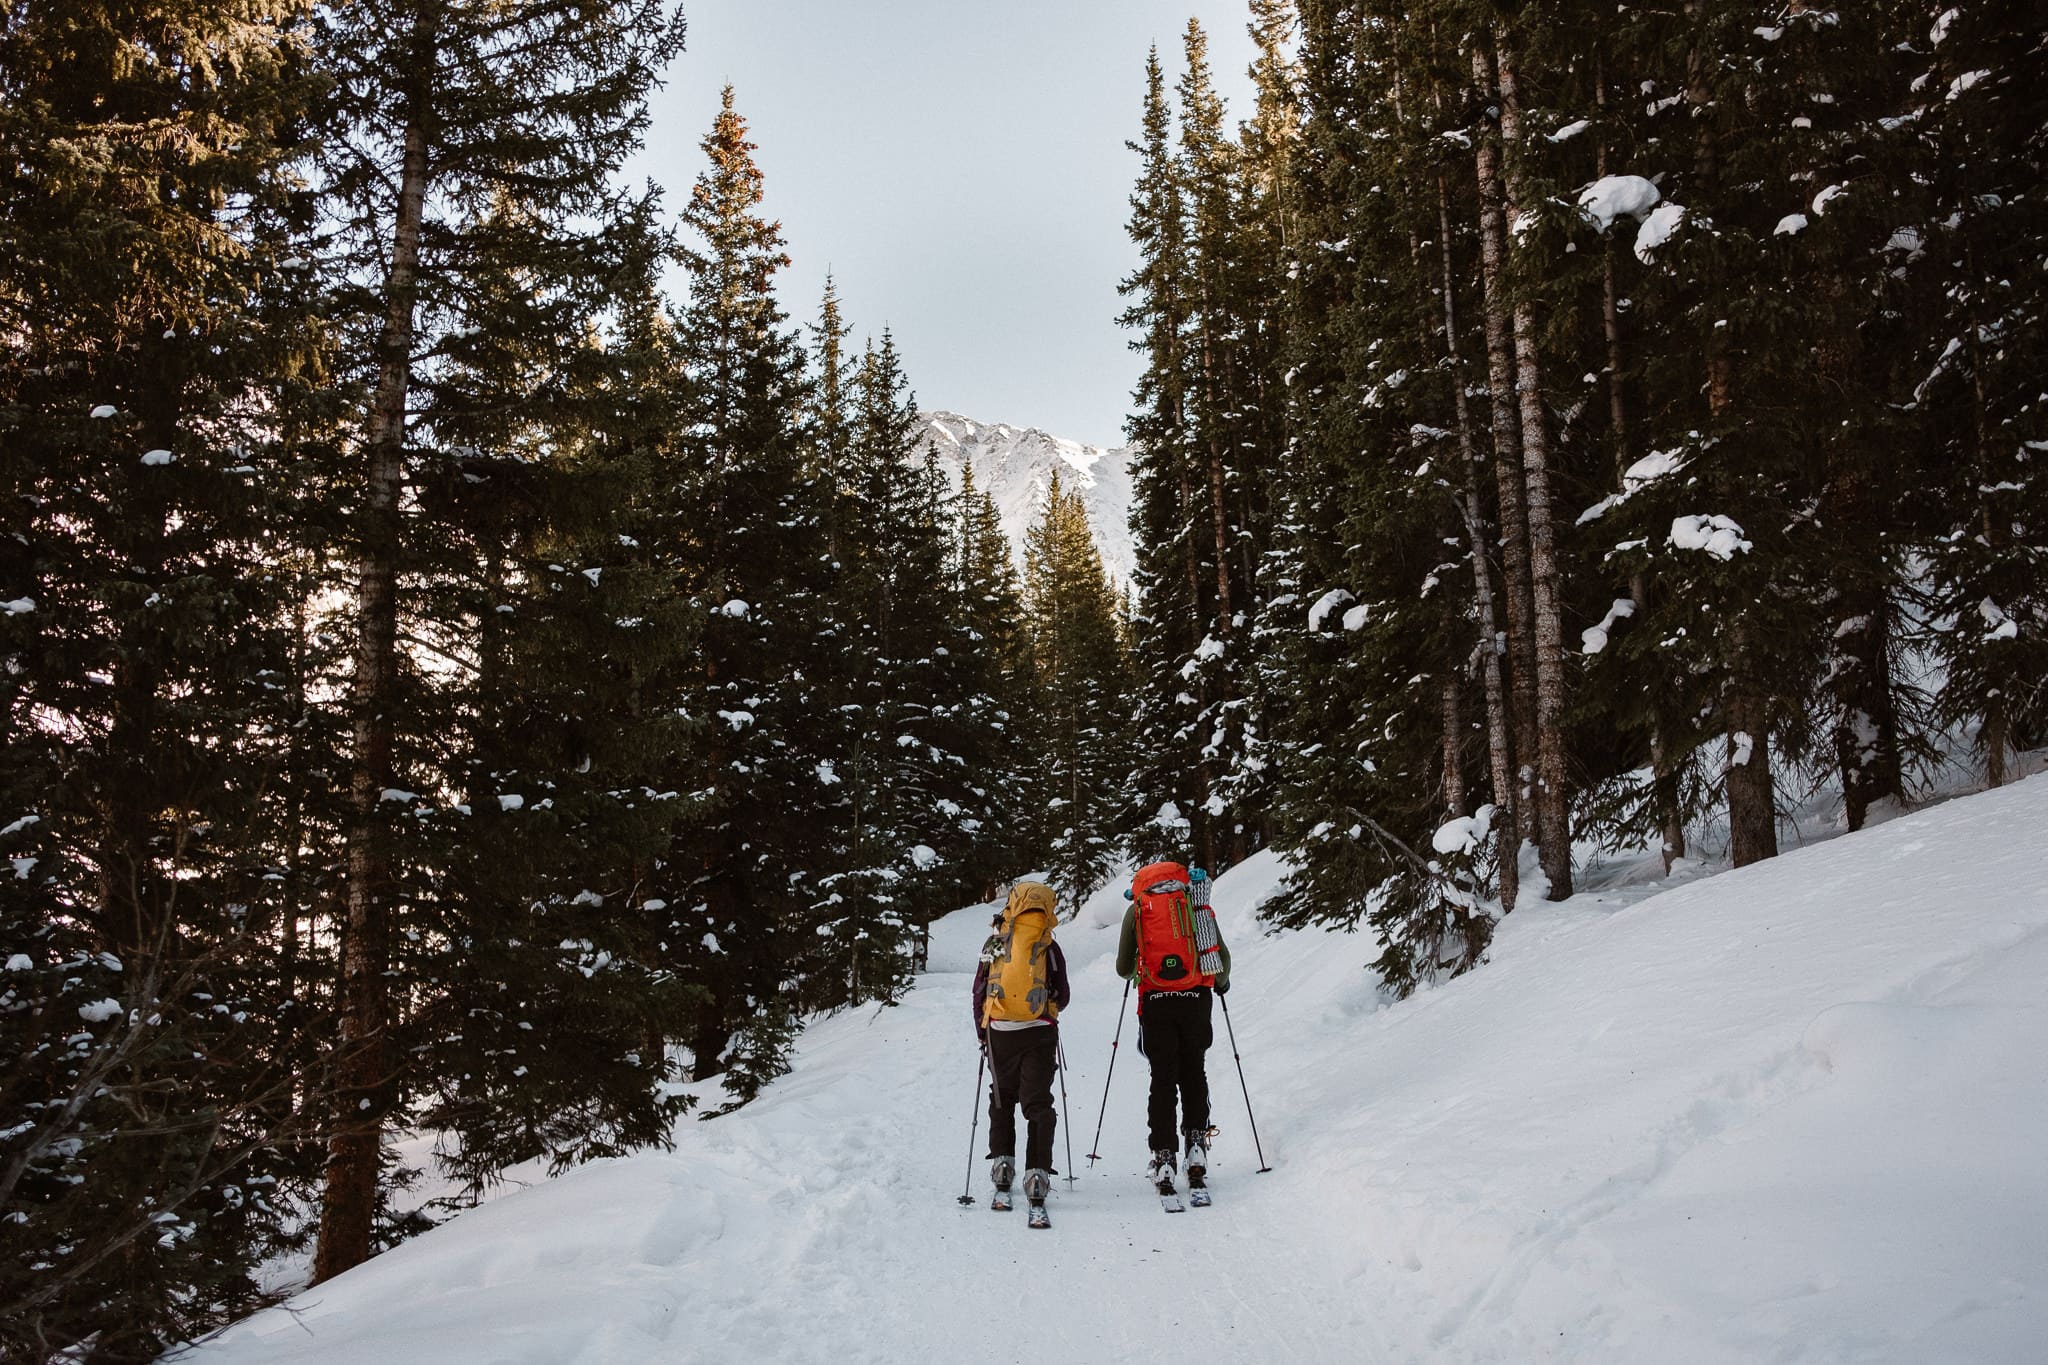 Bride and groom skinning up snow-covered trail, backcountry skiing elopement in Colorado